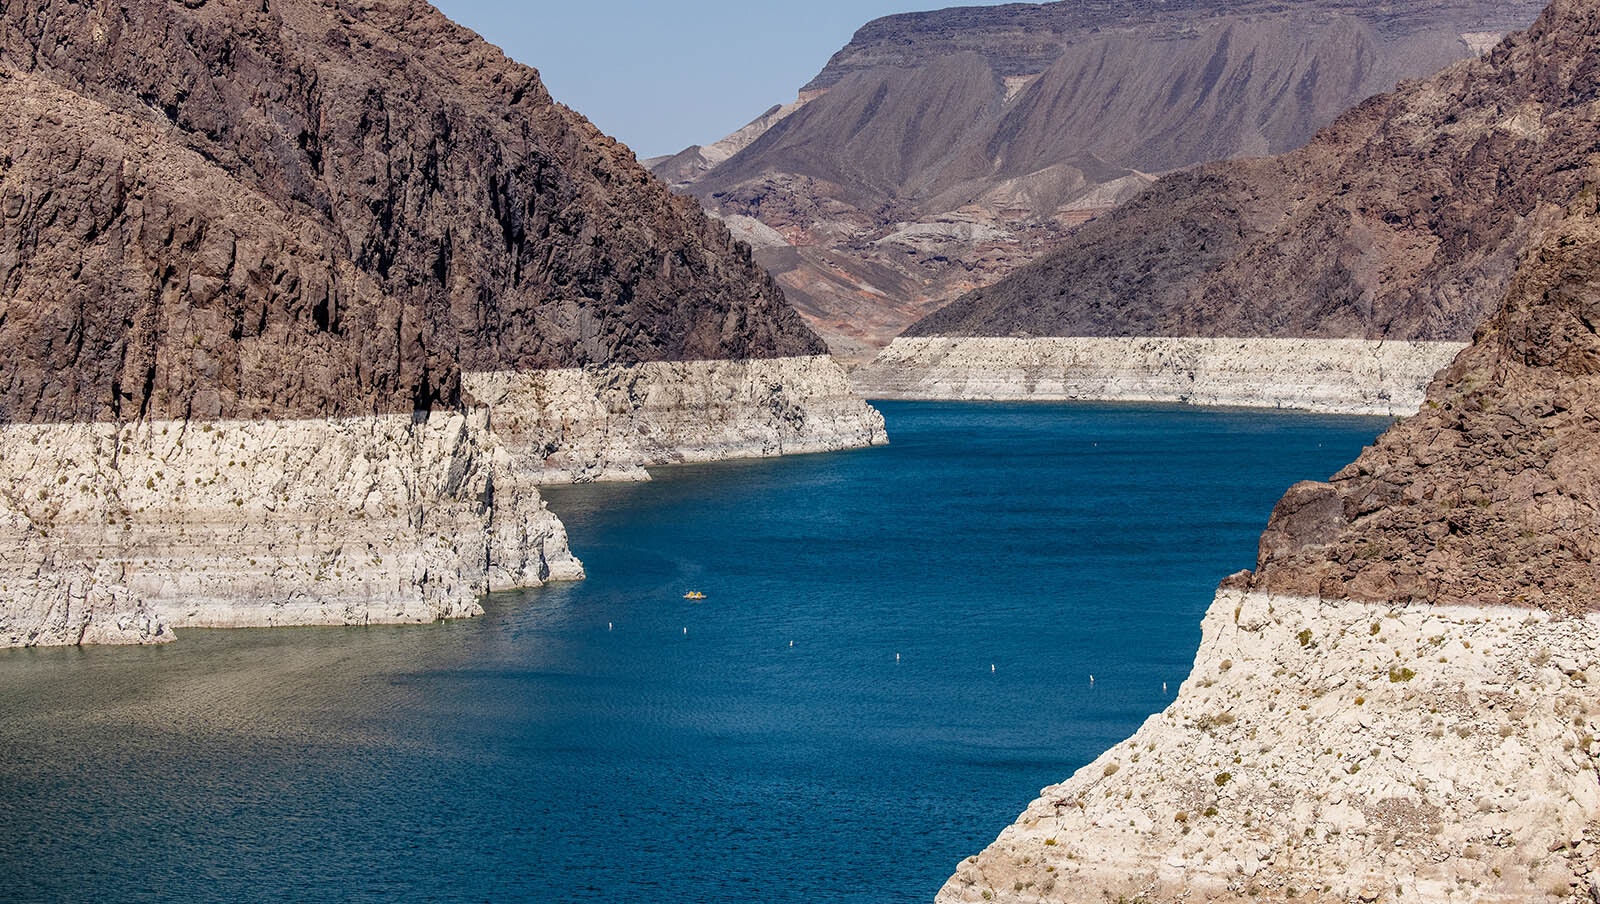 The waterline on the Colorado River as it runs through Nevada shows the stark reality of continuing stresses on the river and the 40 million people who rely on it.